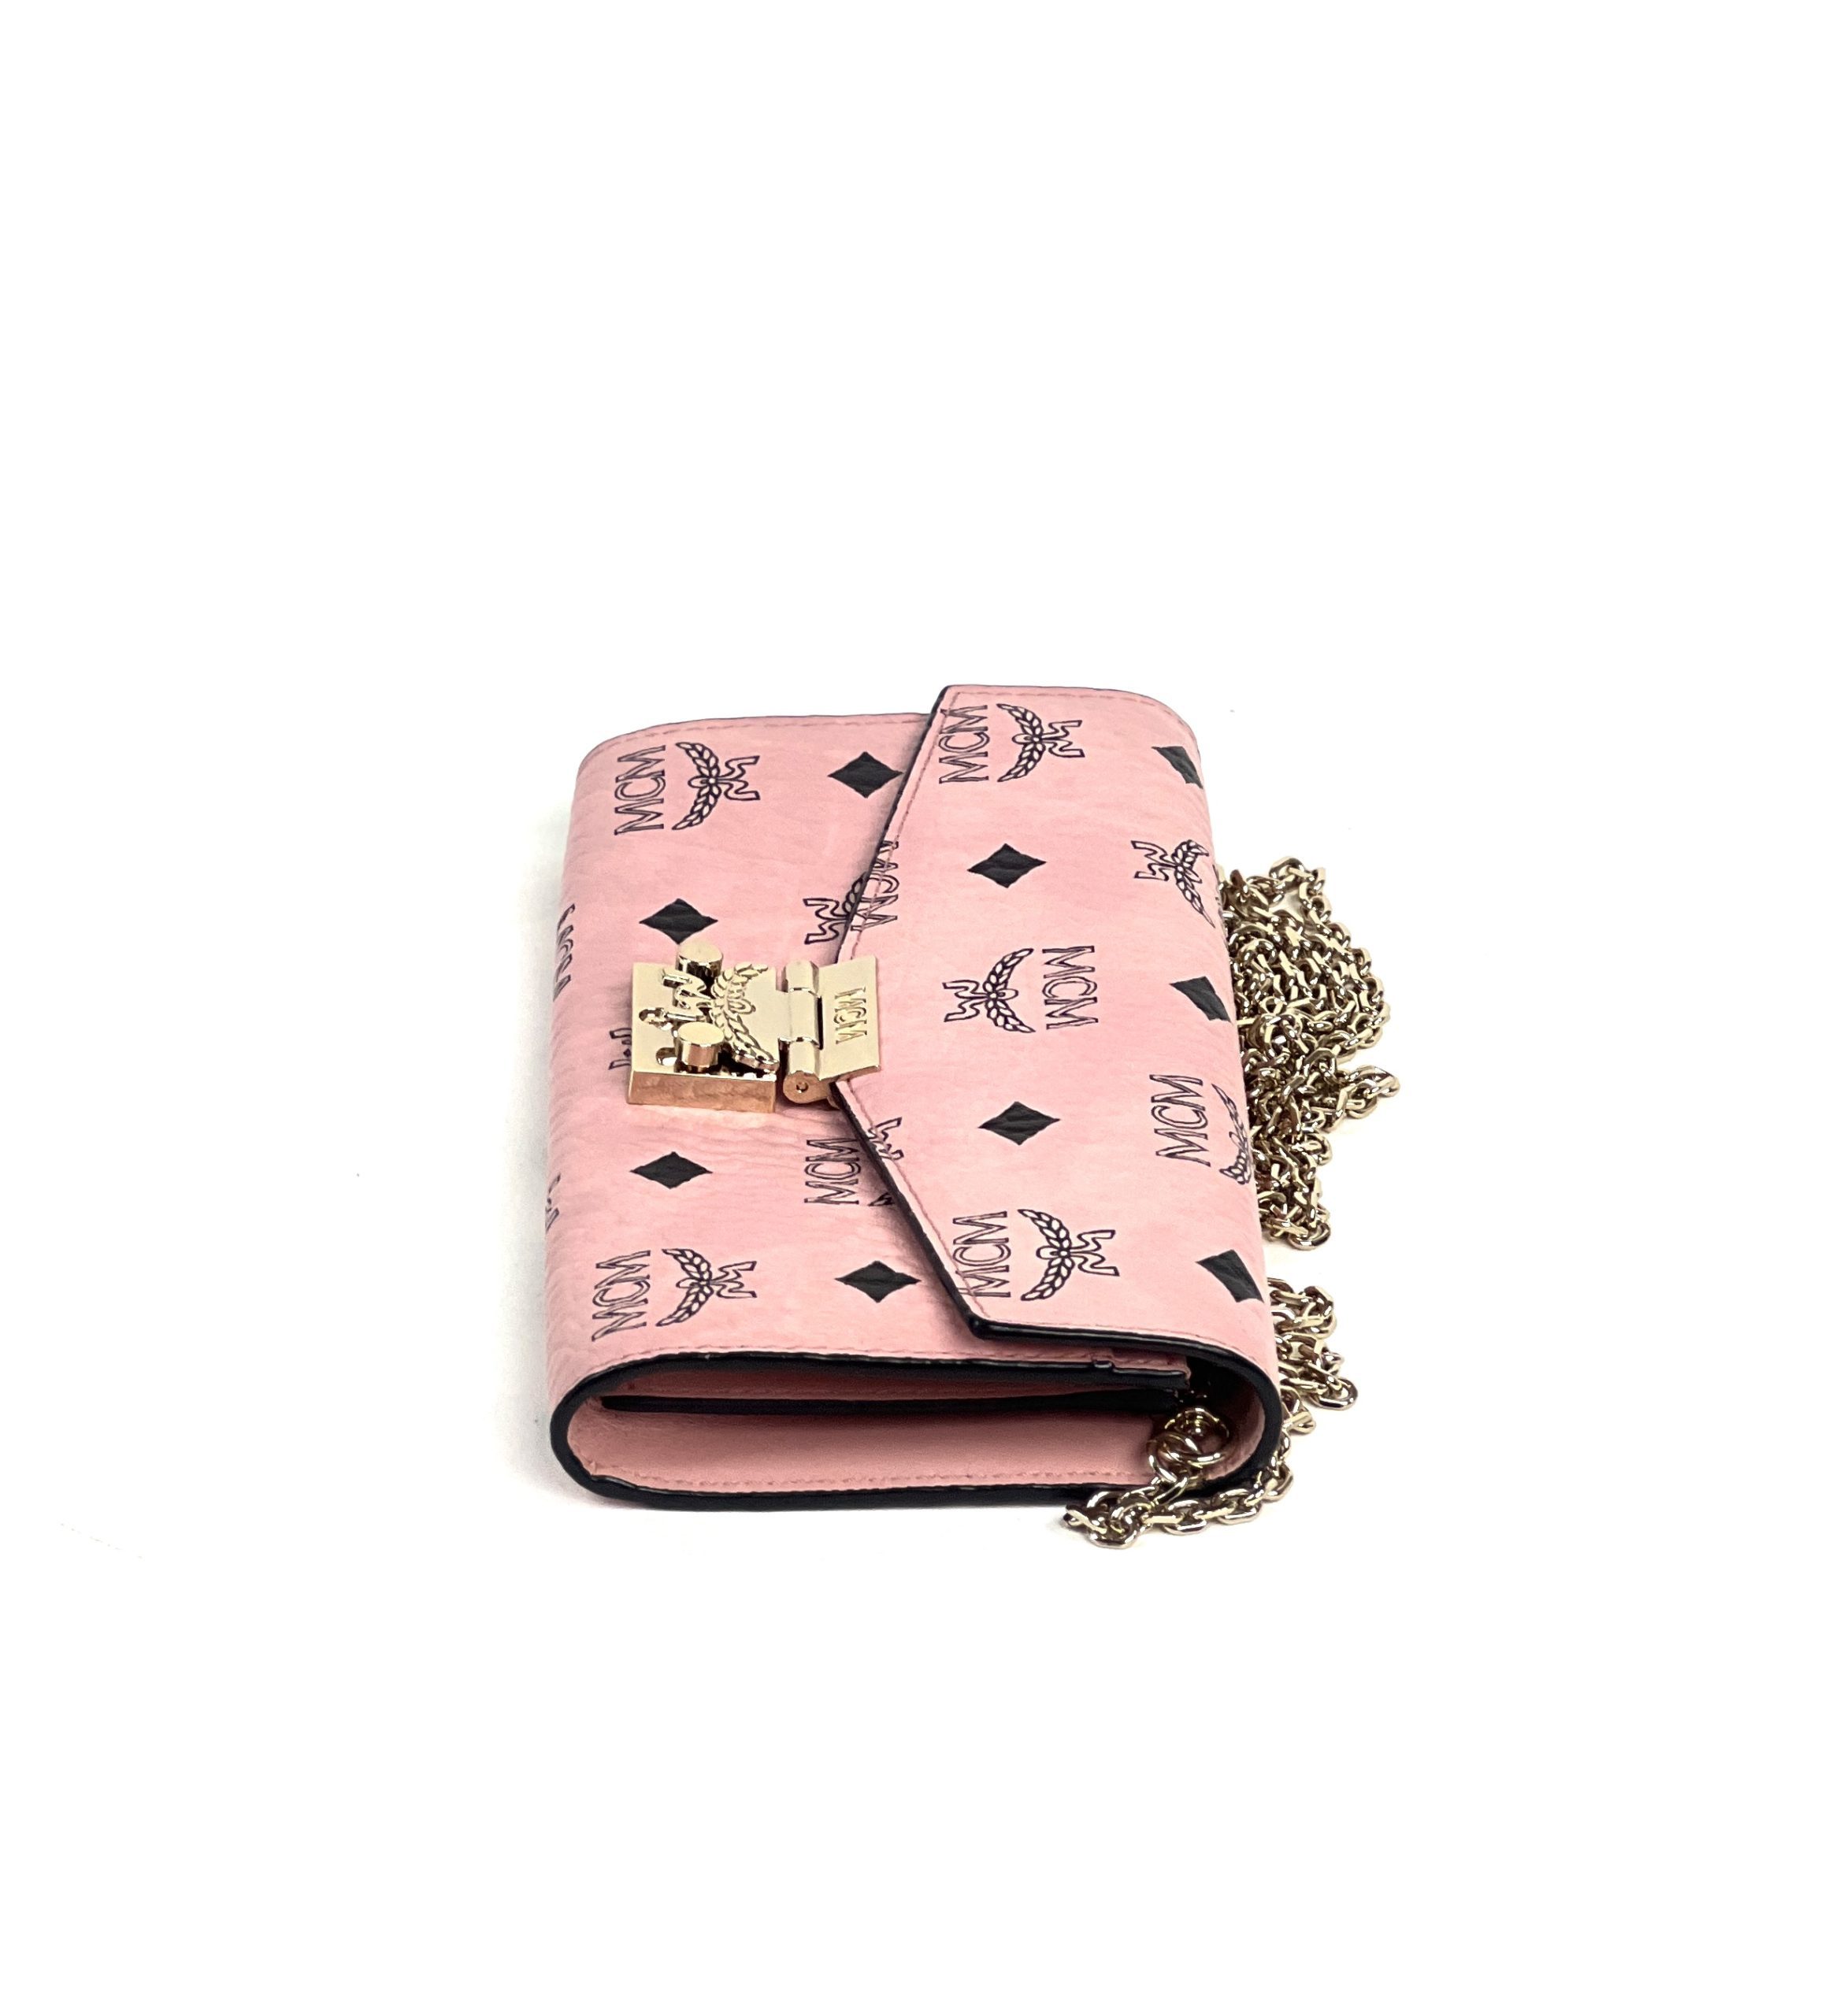 Authentic MCM Patricia Pink Clutch Bag Wallet On A Chain CrossBody NWT+Gift  Box